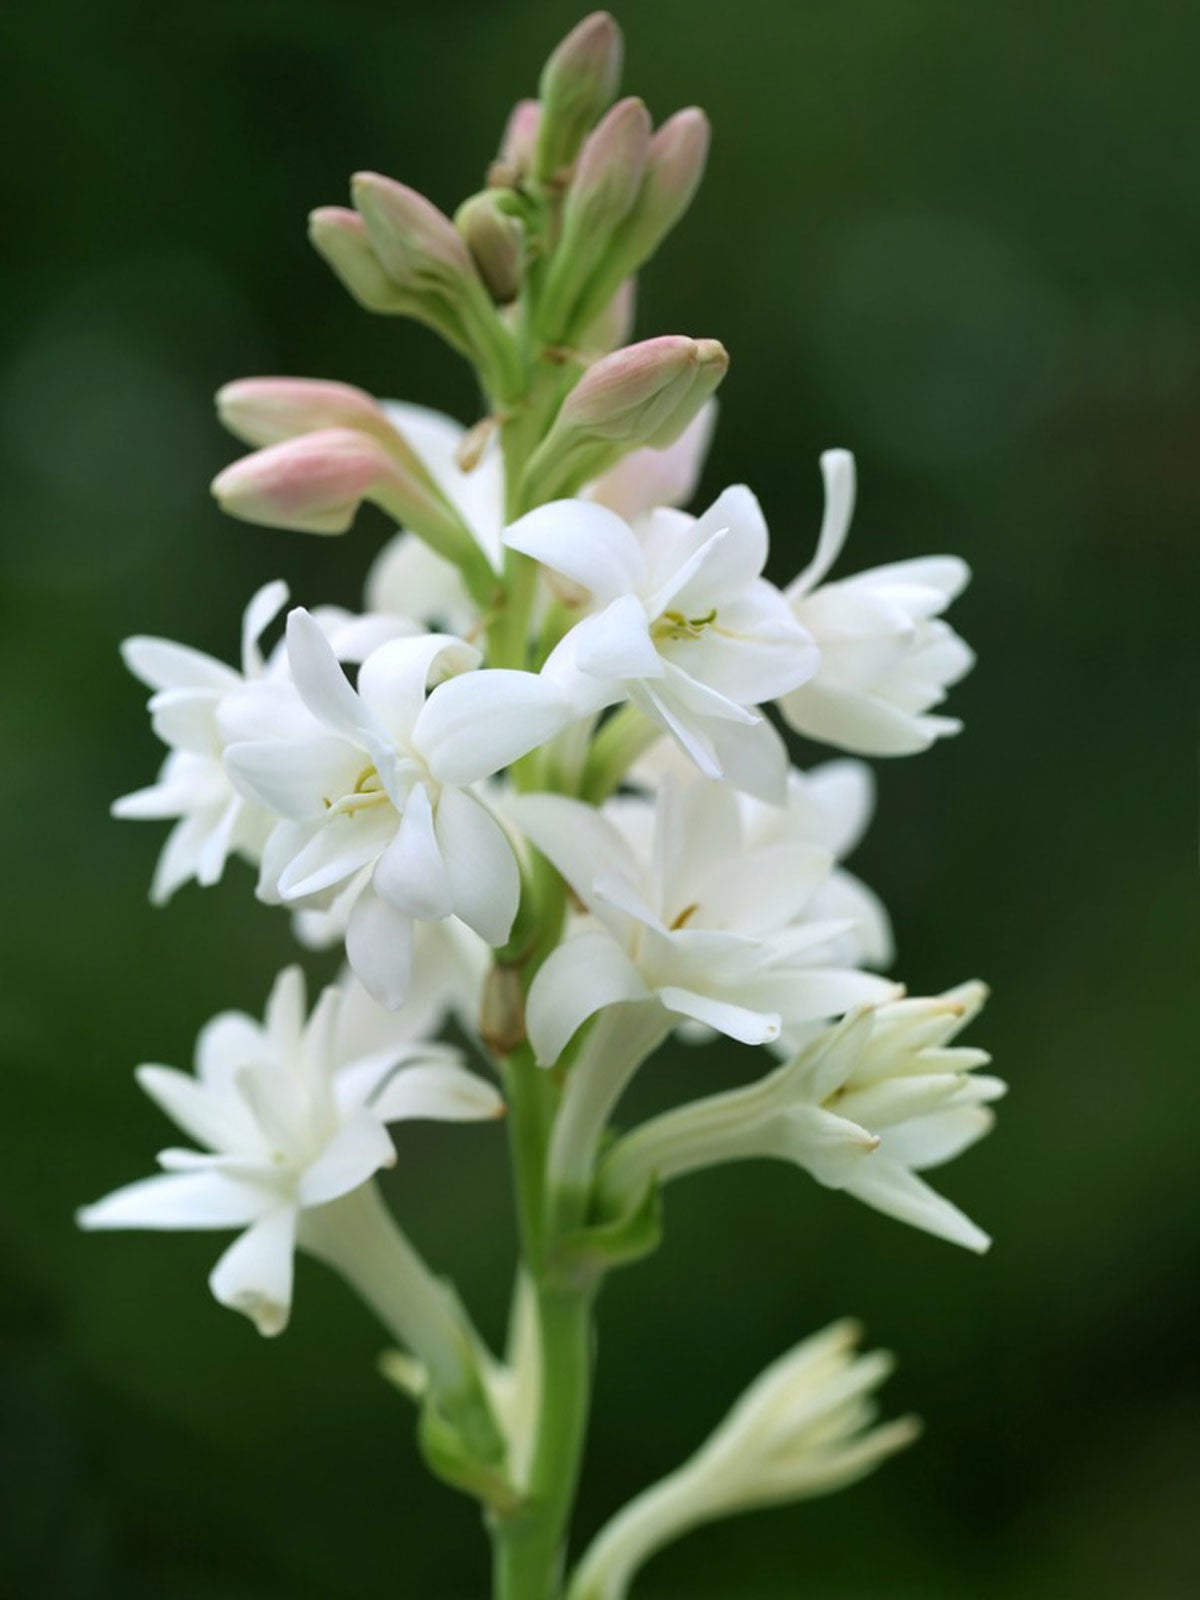 How to Care For a Tuberose Plant